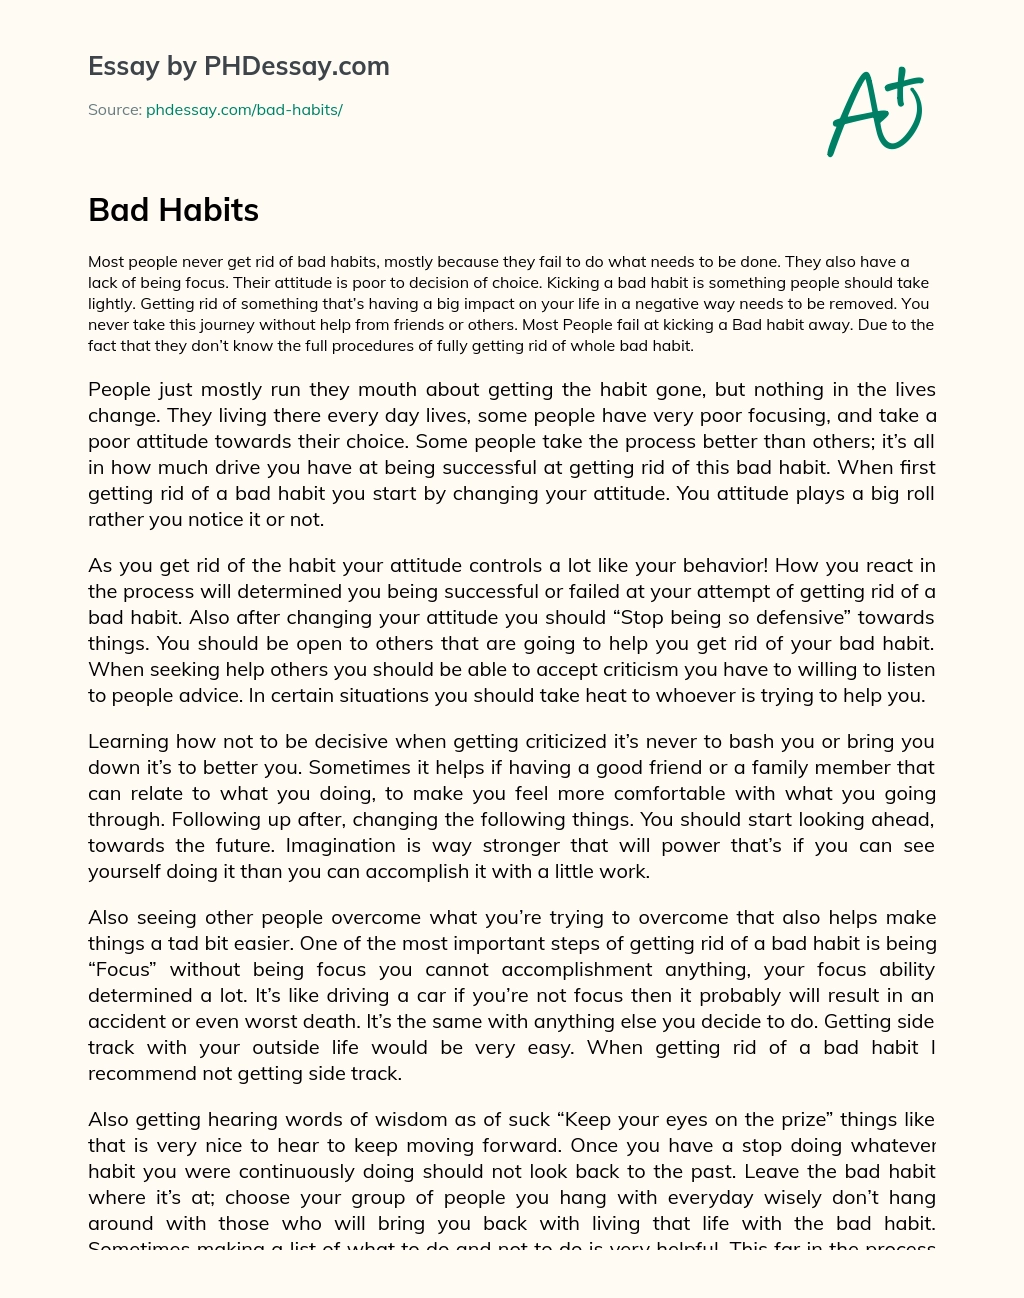 essay about bad habits